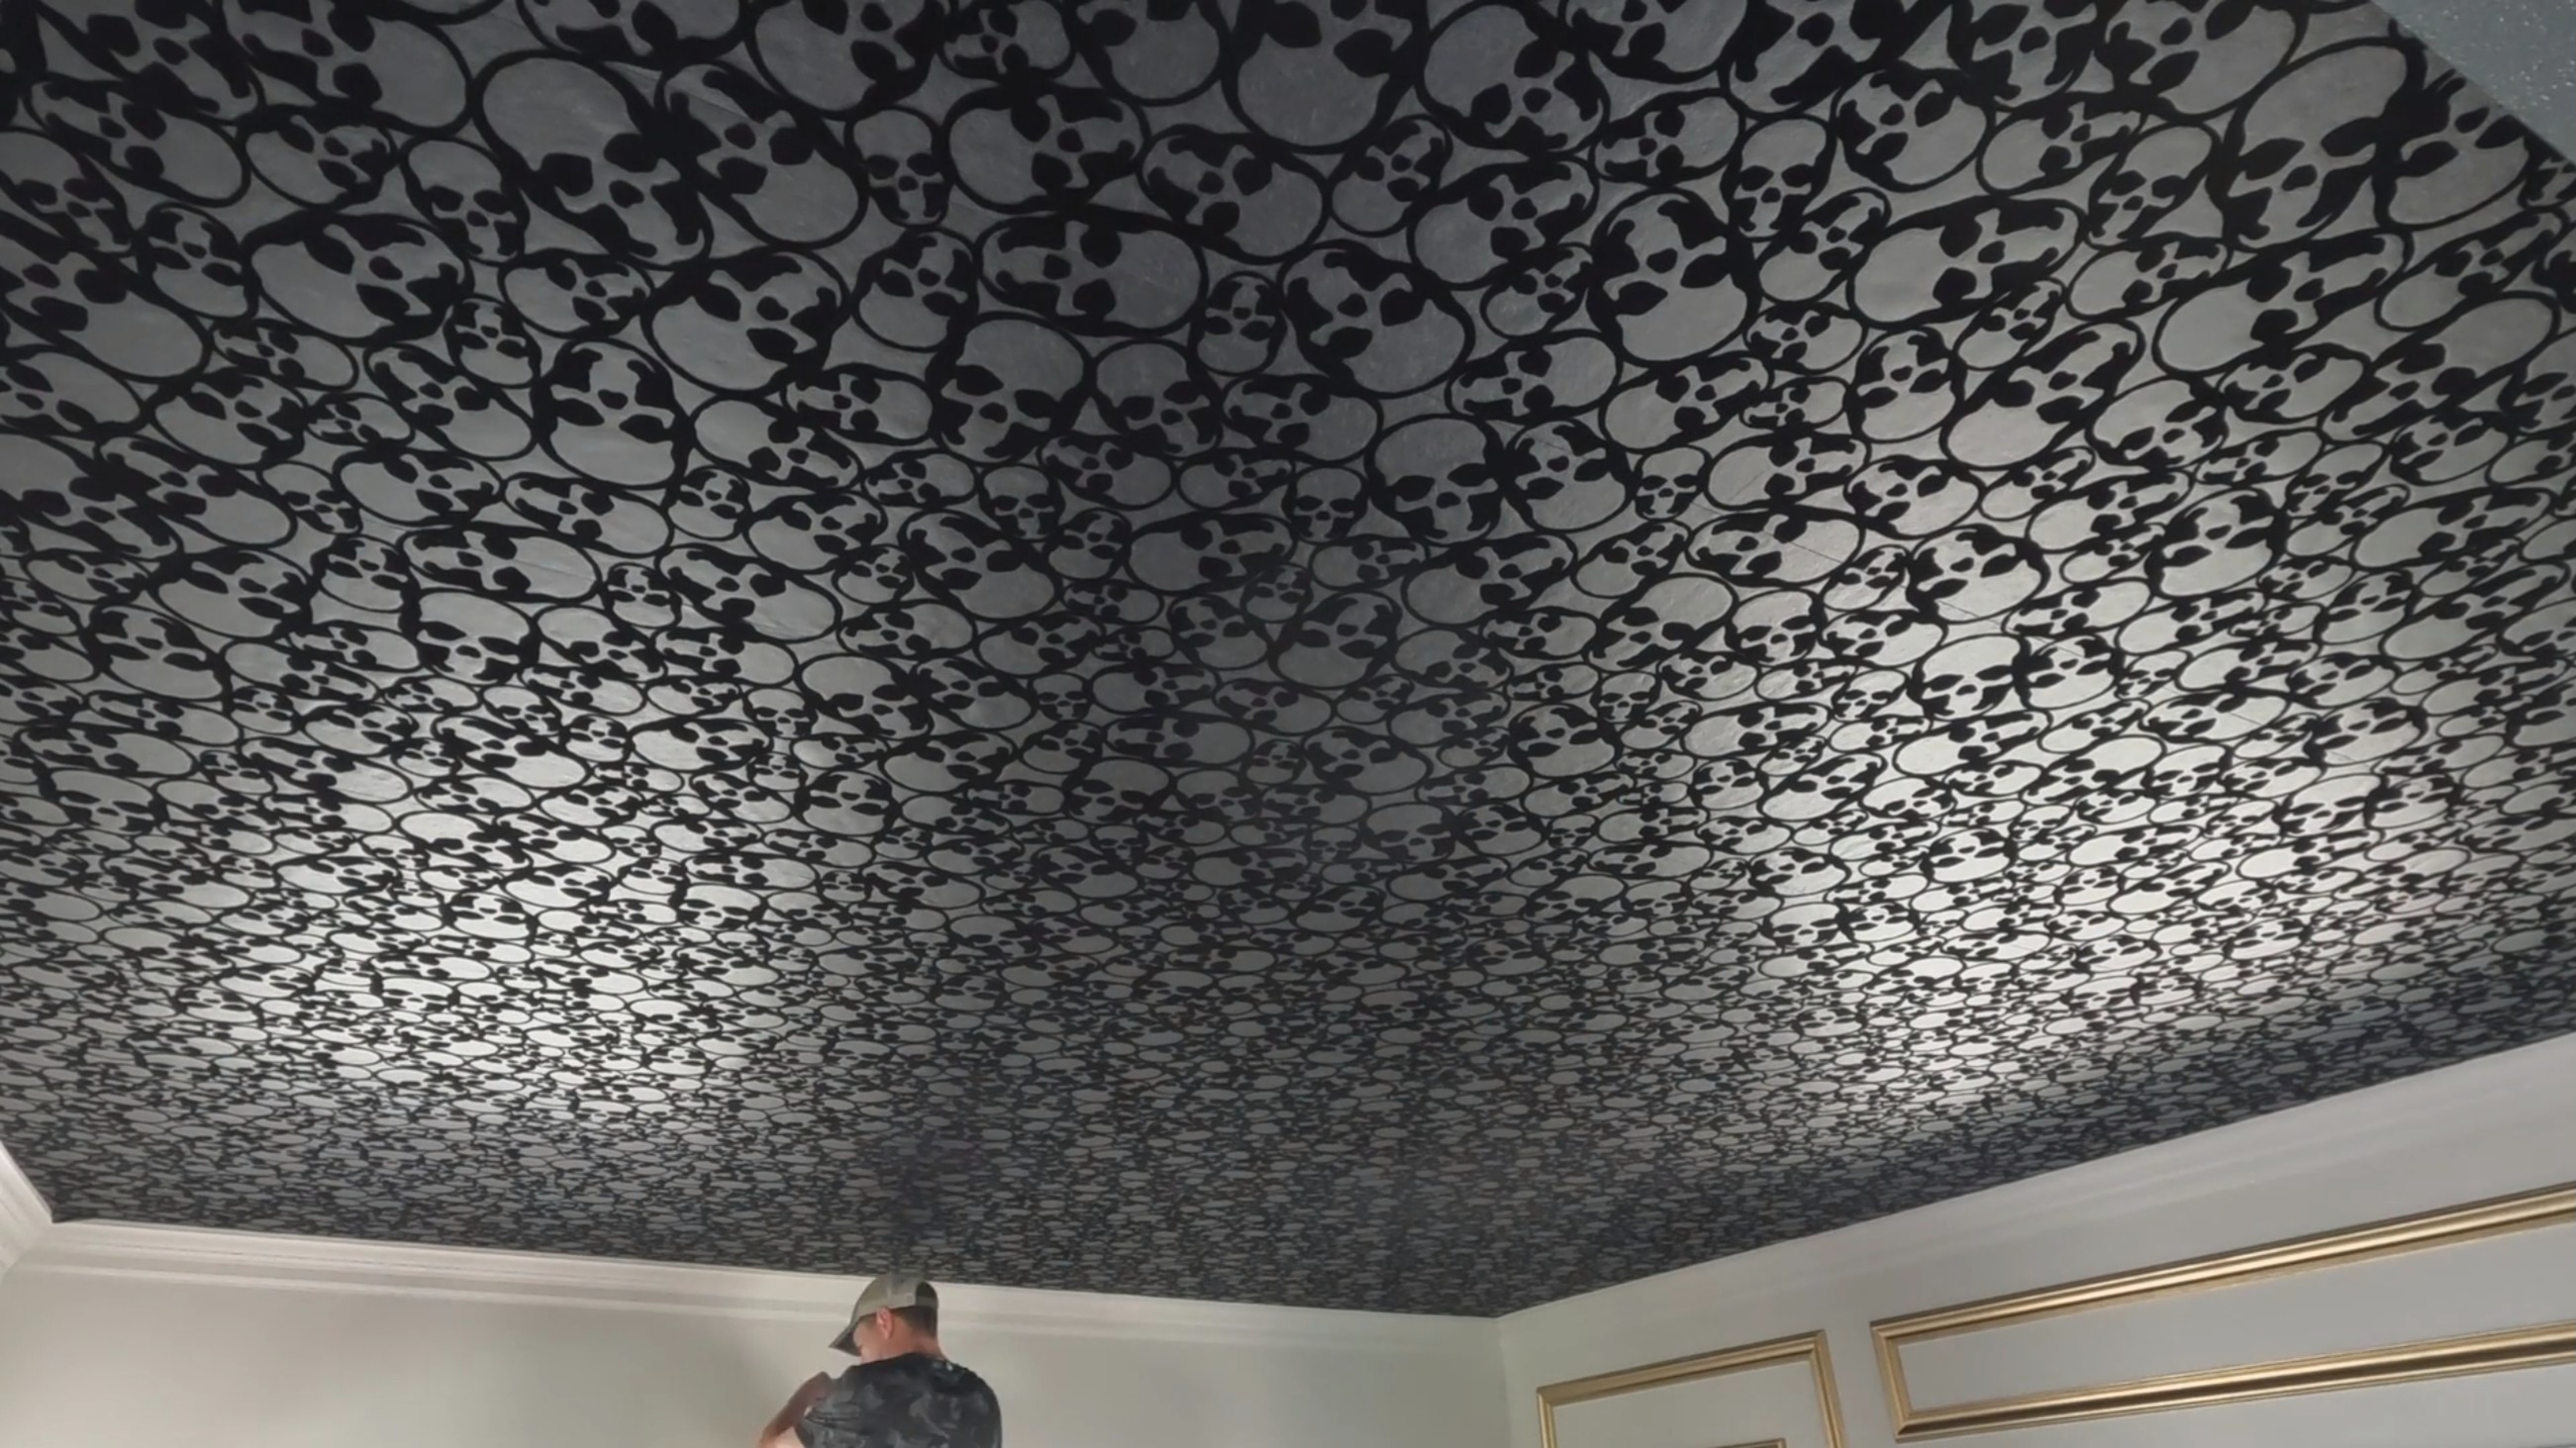 Viewers previously complained that they didn't like the skull wallpaper design Chelsea chose for a client's home